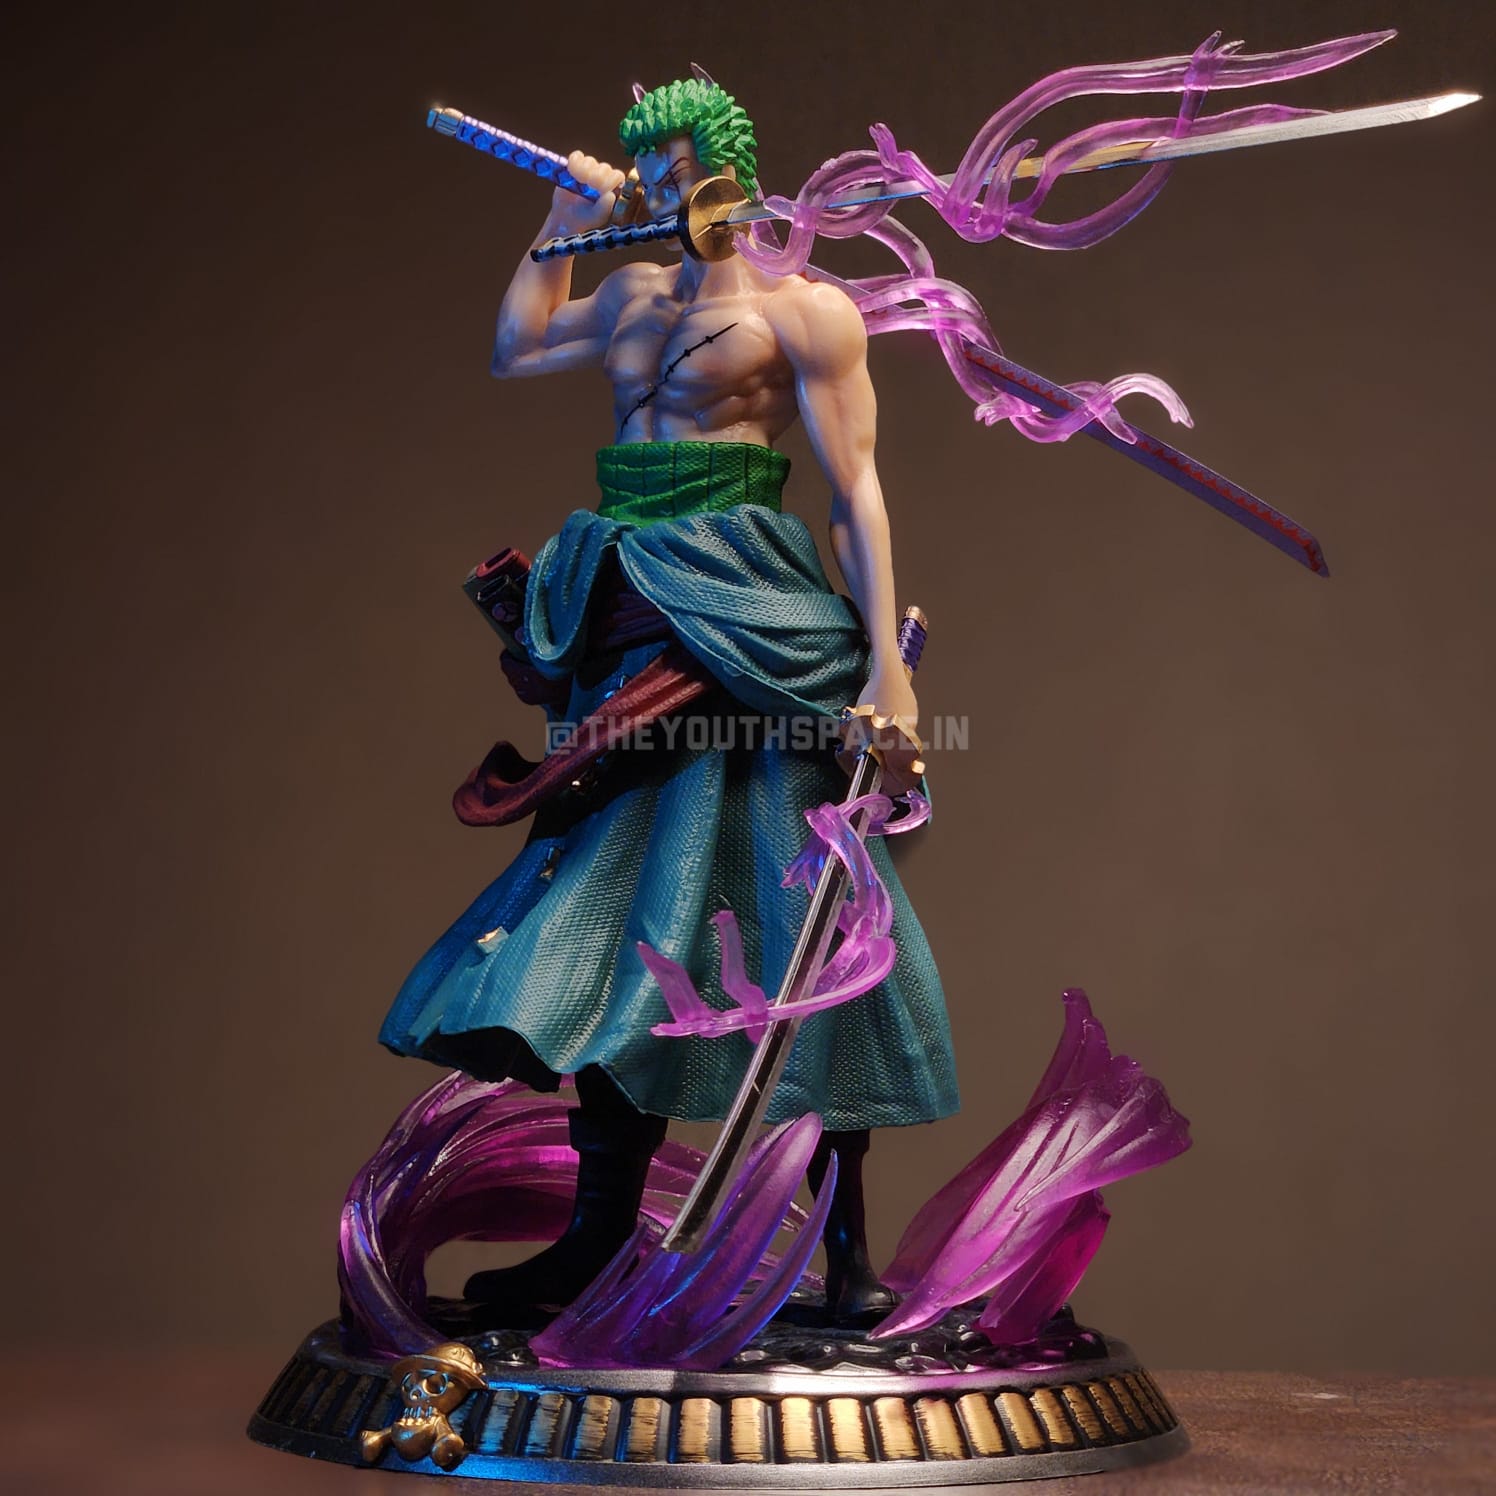 Simmpu Roronoa Zoro Figure Onepiece Popular Anime Model Zoro Action Figure  PVC Statue Doll Collectible Collection Ornaments Collectibles Desk - OLMCOL